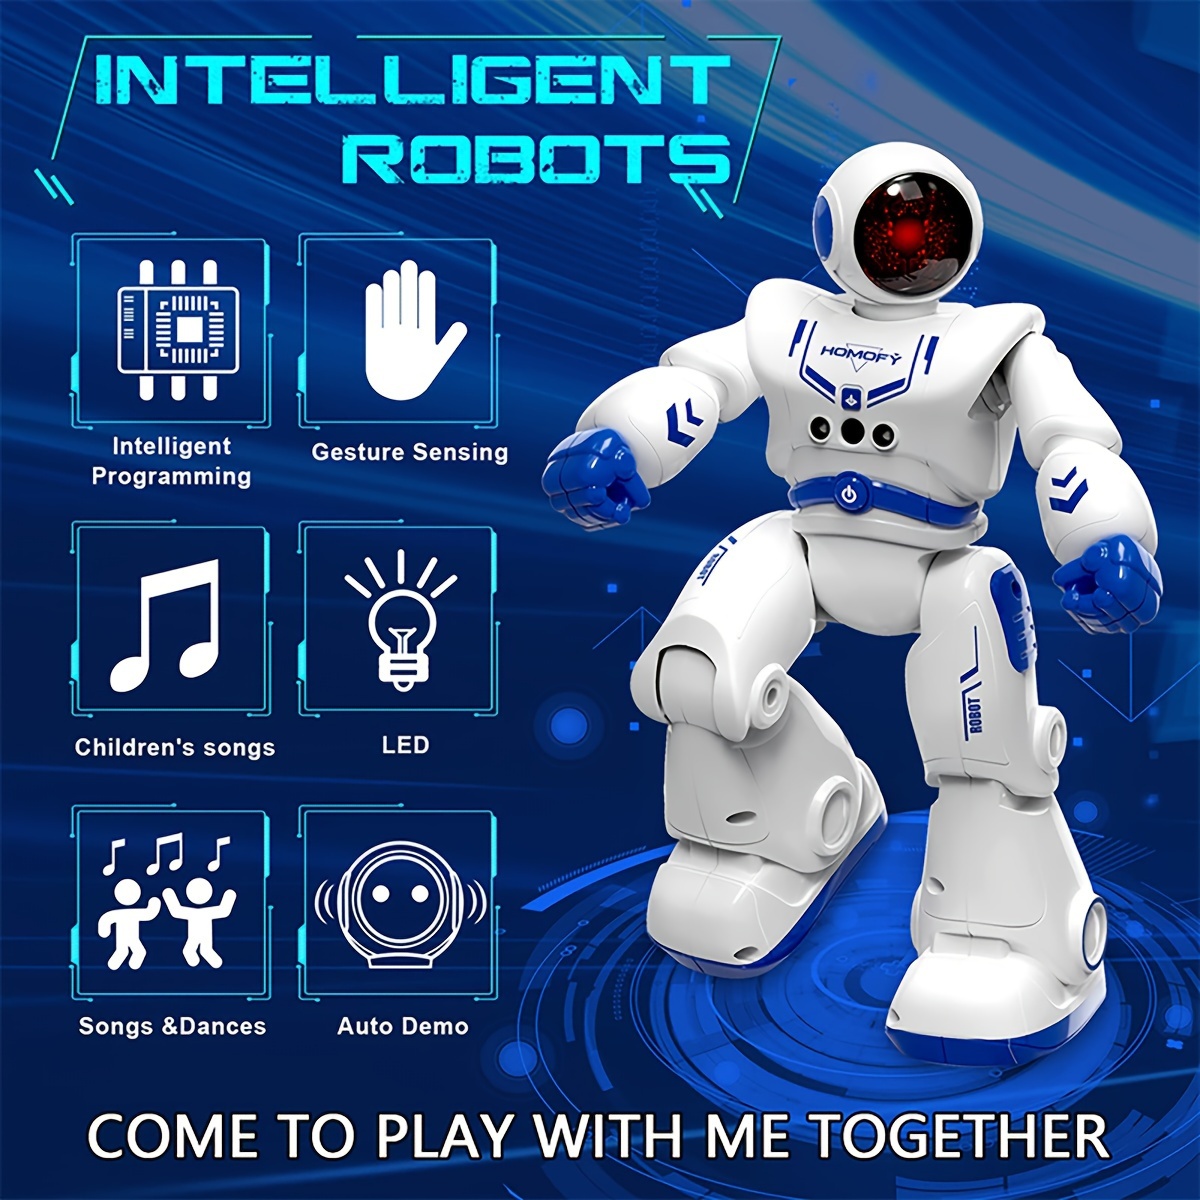 Battery Operated Remote Control Transforming Intelligent Robot 7